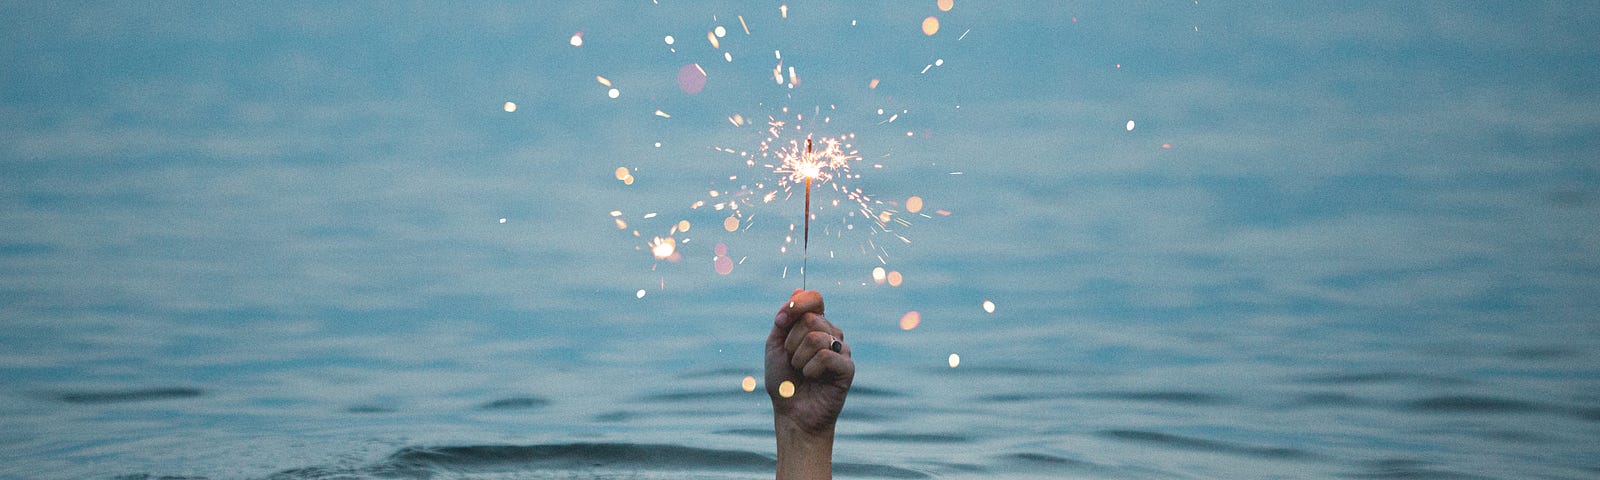 Craving love. Self-development. A person underwater holding a sparkler above the water.